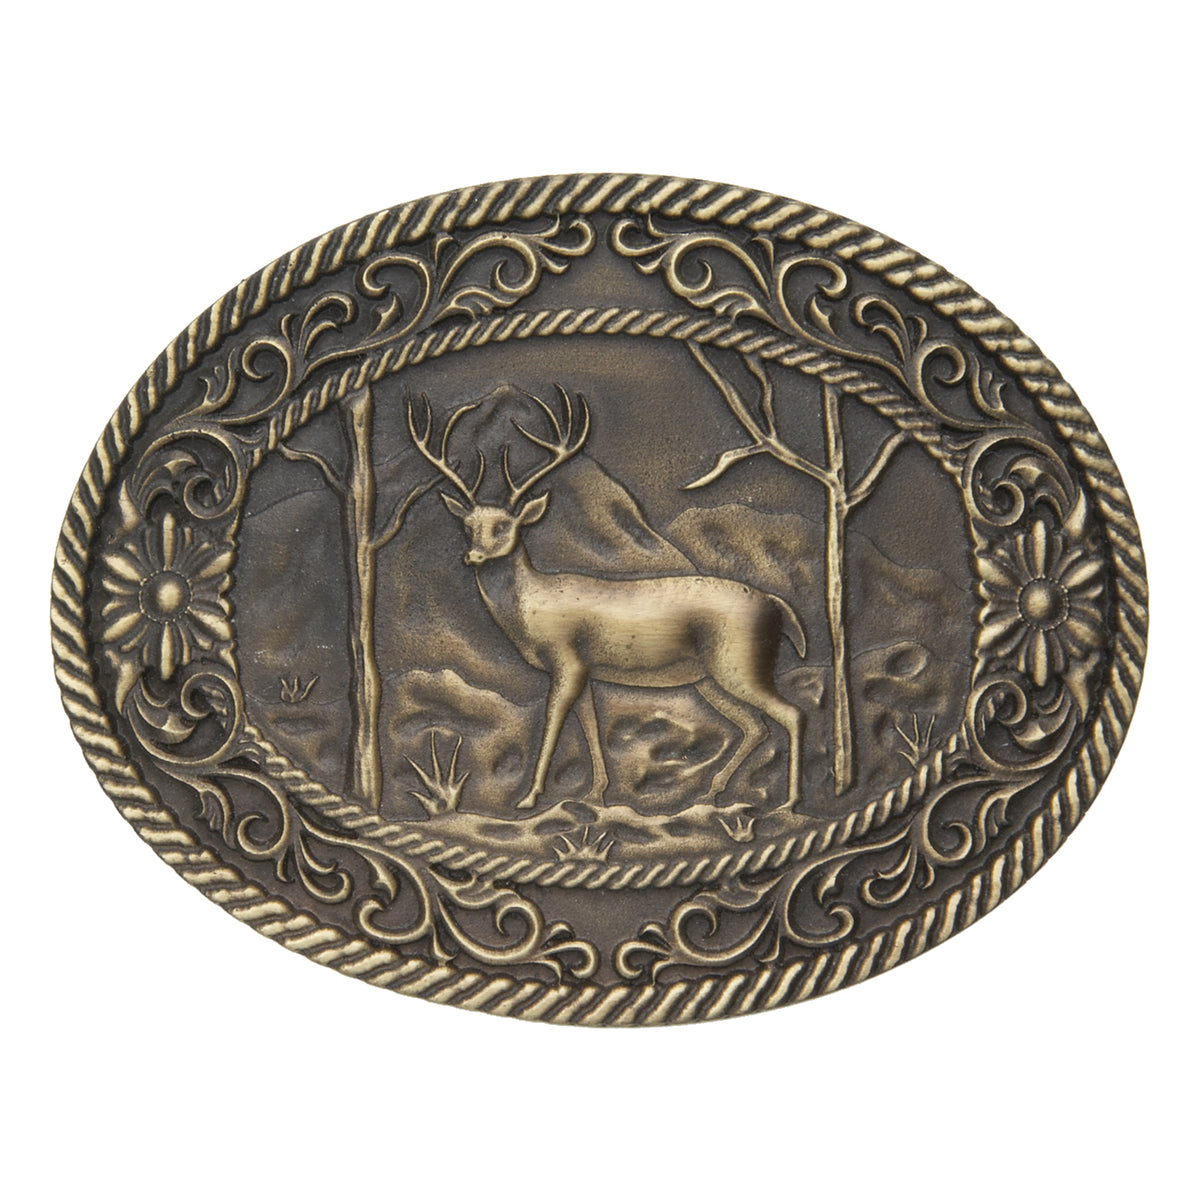 White Tail Deer with Scrolls Buckle